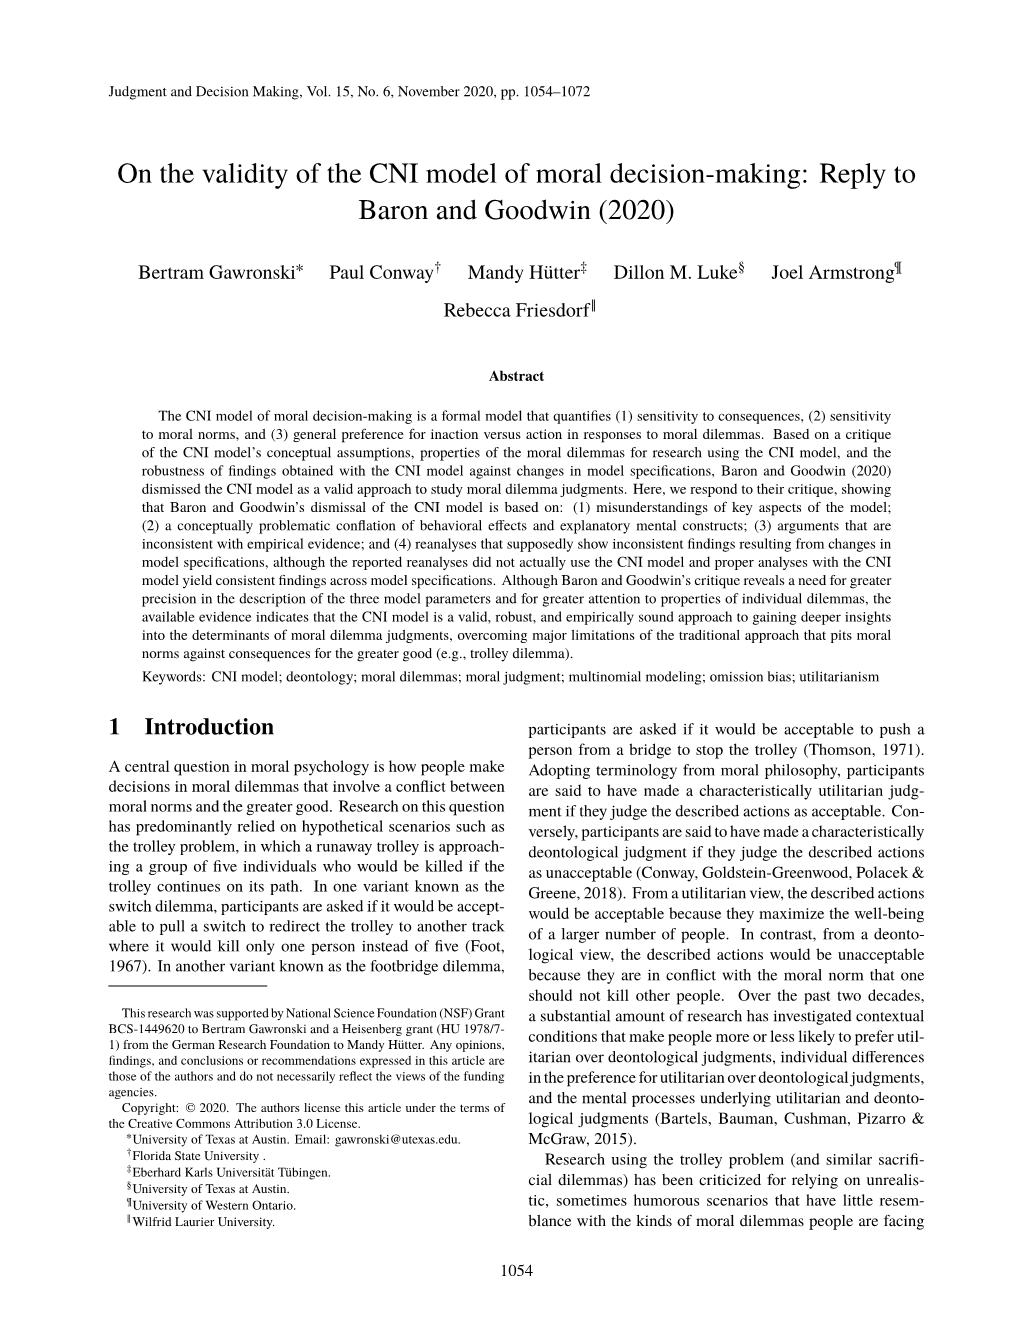 On the Validity of the CNI Model of Moral Decision-Making: Reply to Baron and Goodwin (2020)